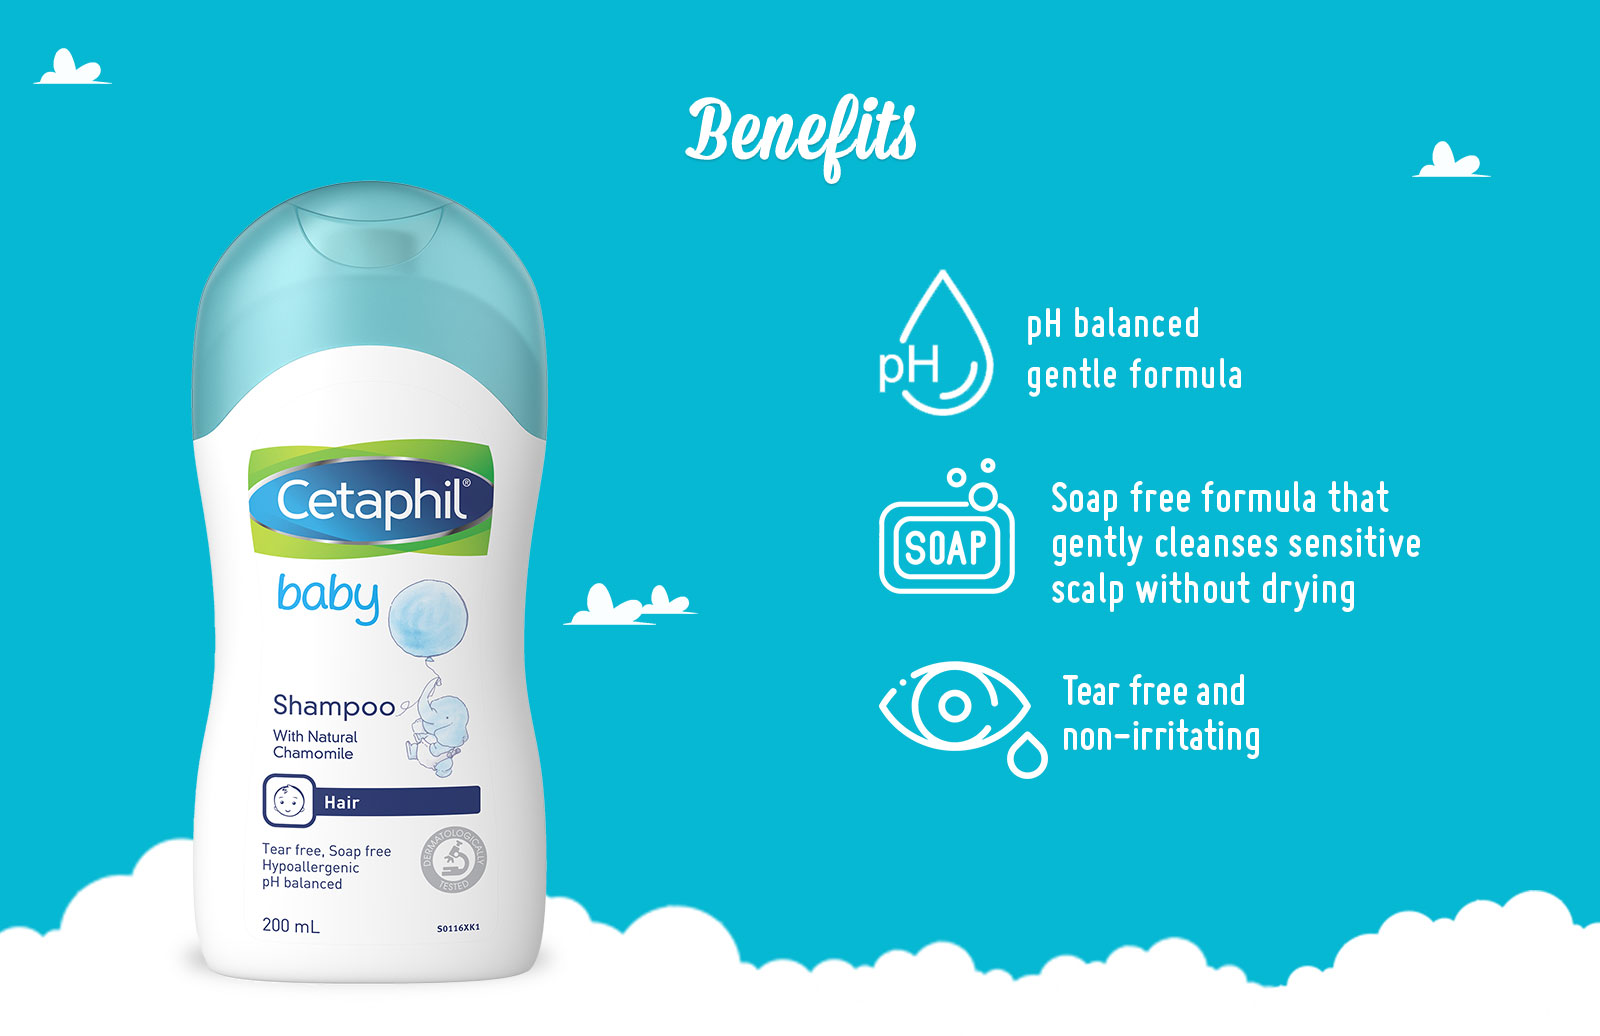 Cetaphil Baby Shampoo 200ml is available at Alpro Pharmacy